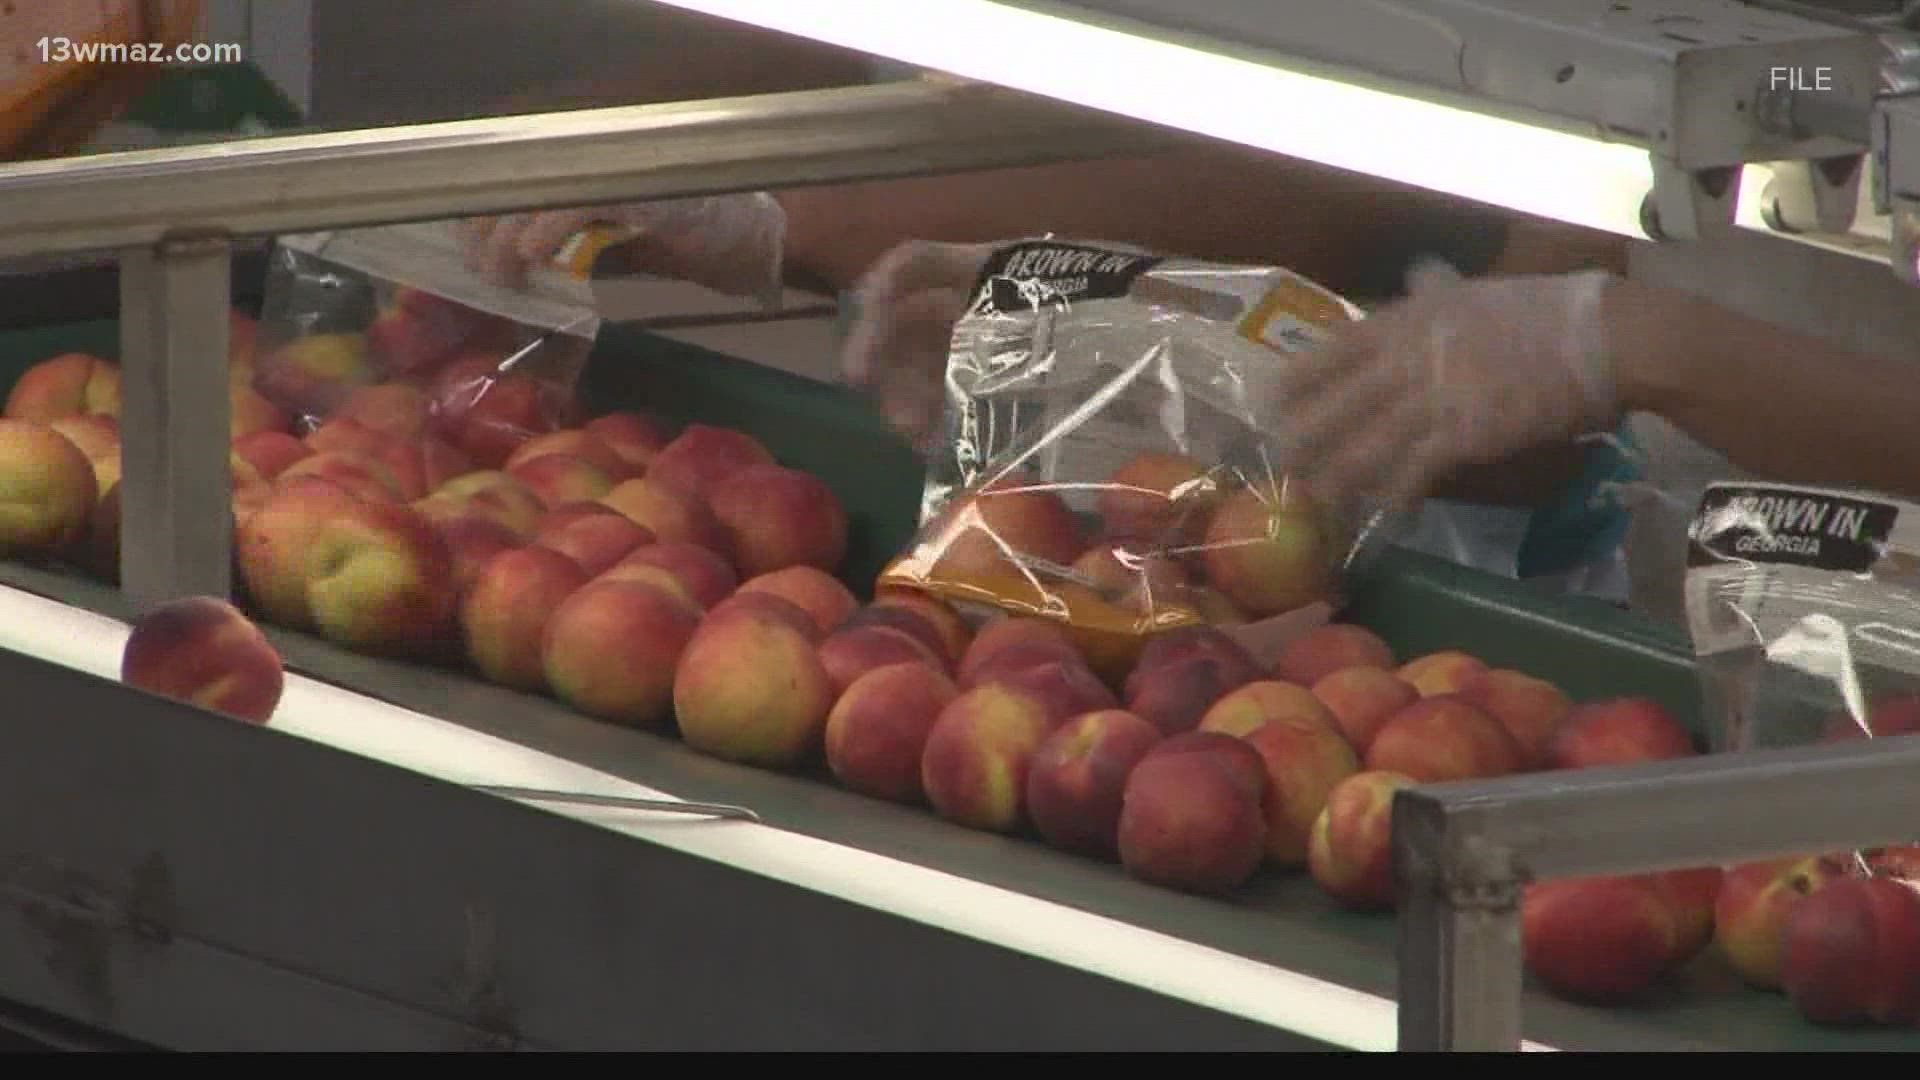 This summer, peaches have been nothing short of plentiful thanks to a picture perfect growing season.